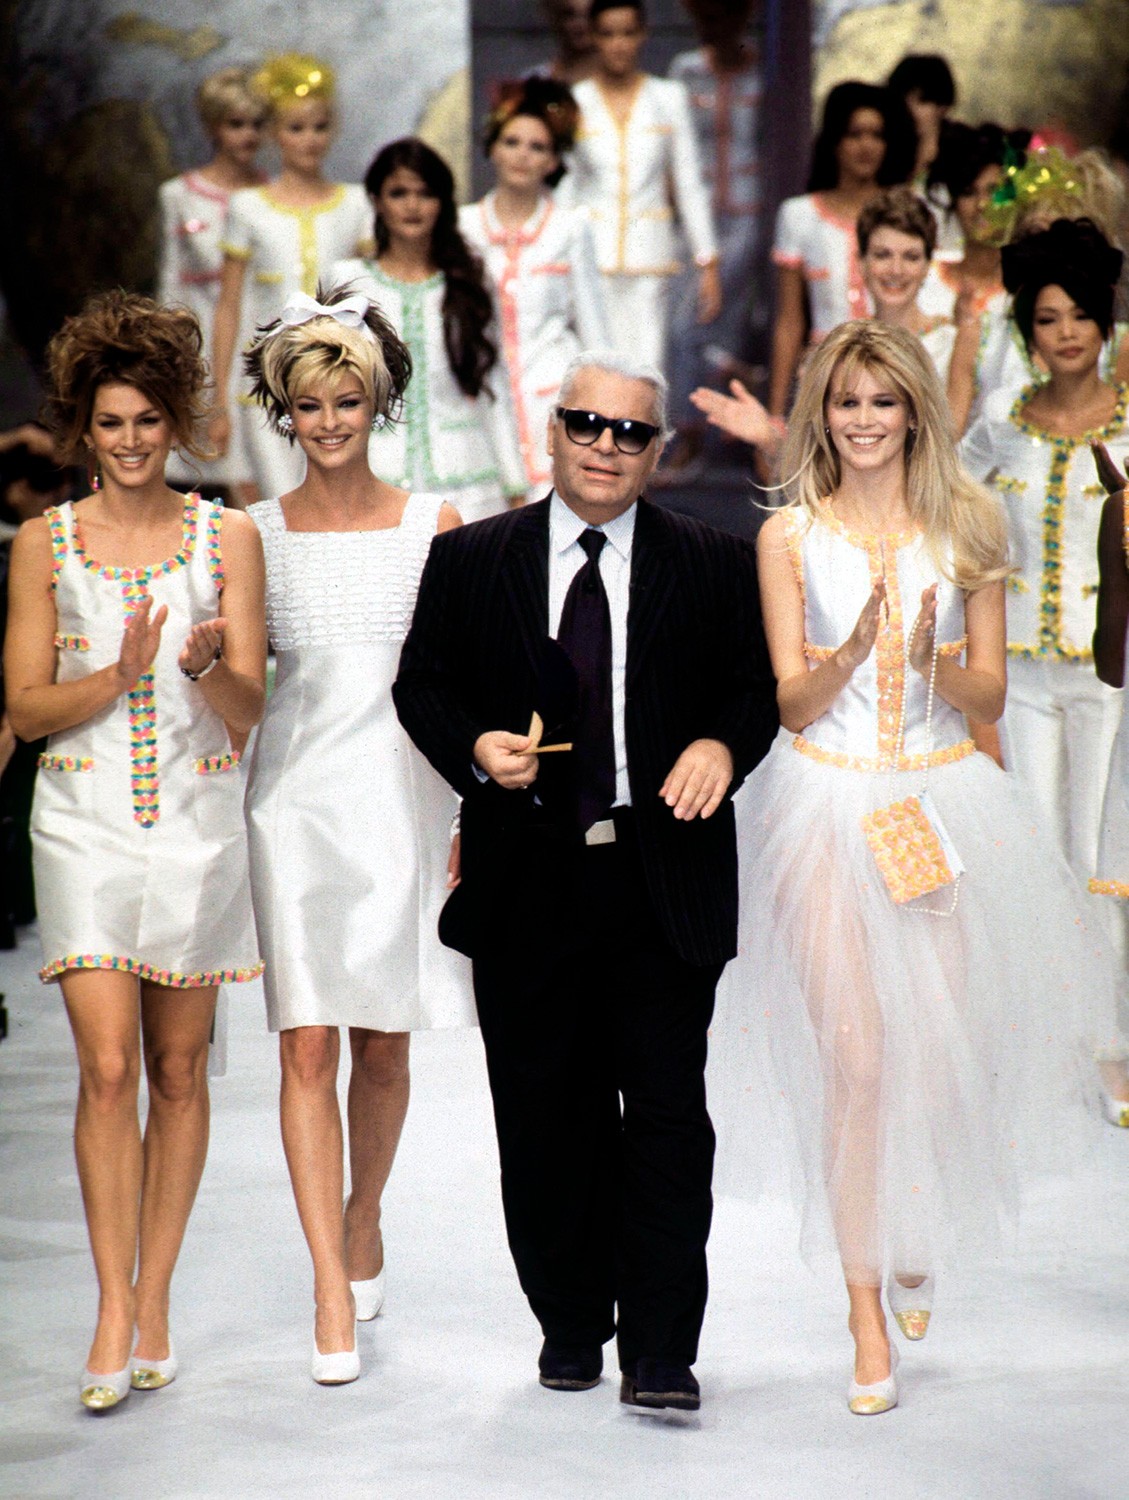 Karl Lagerfeld's Life in Photos